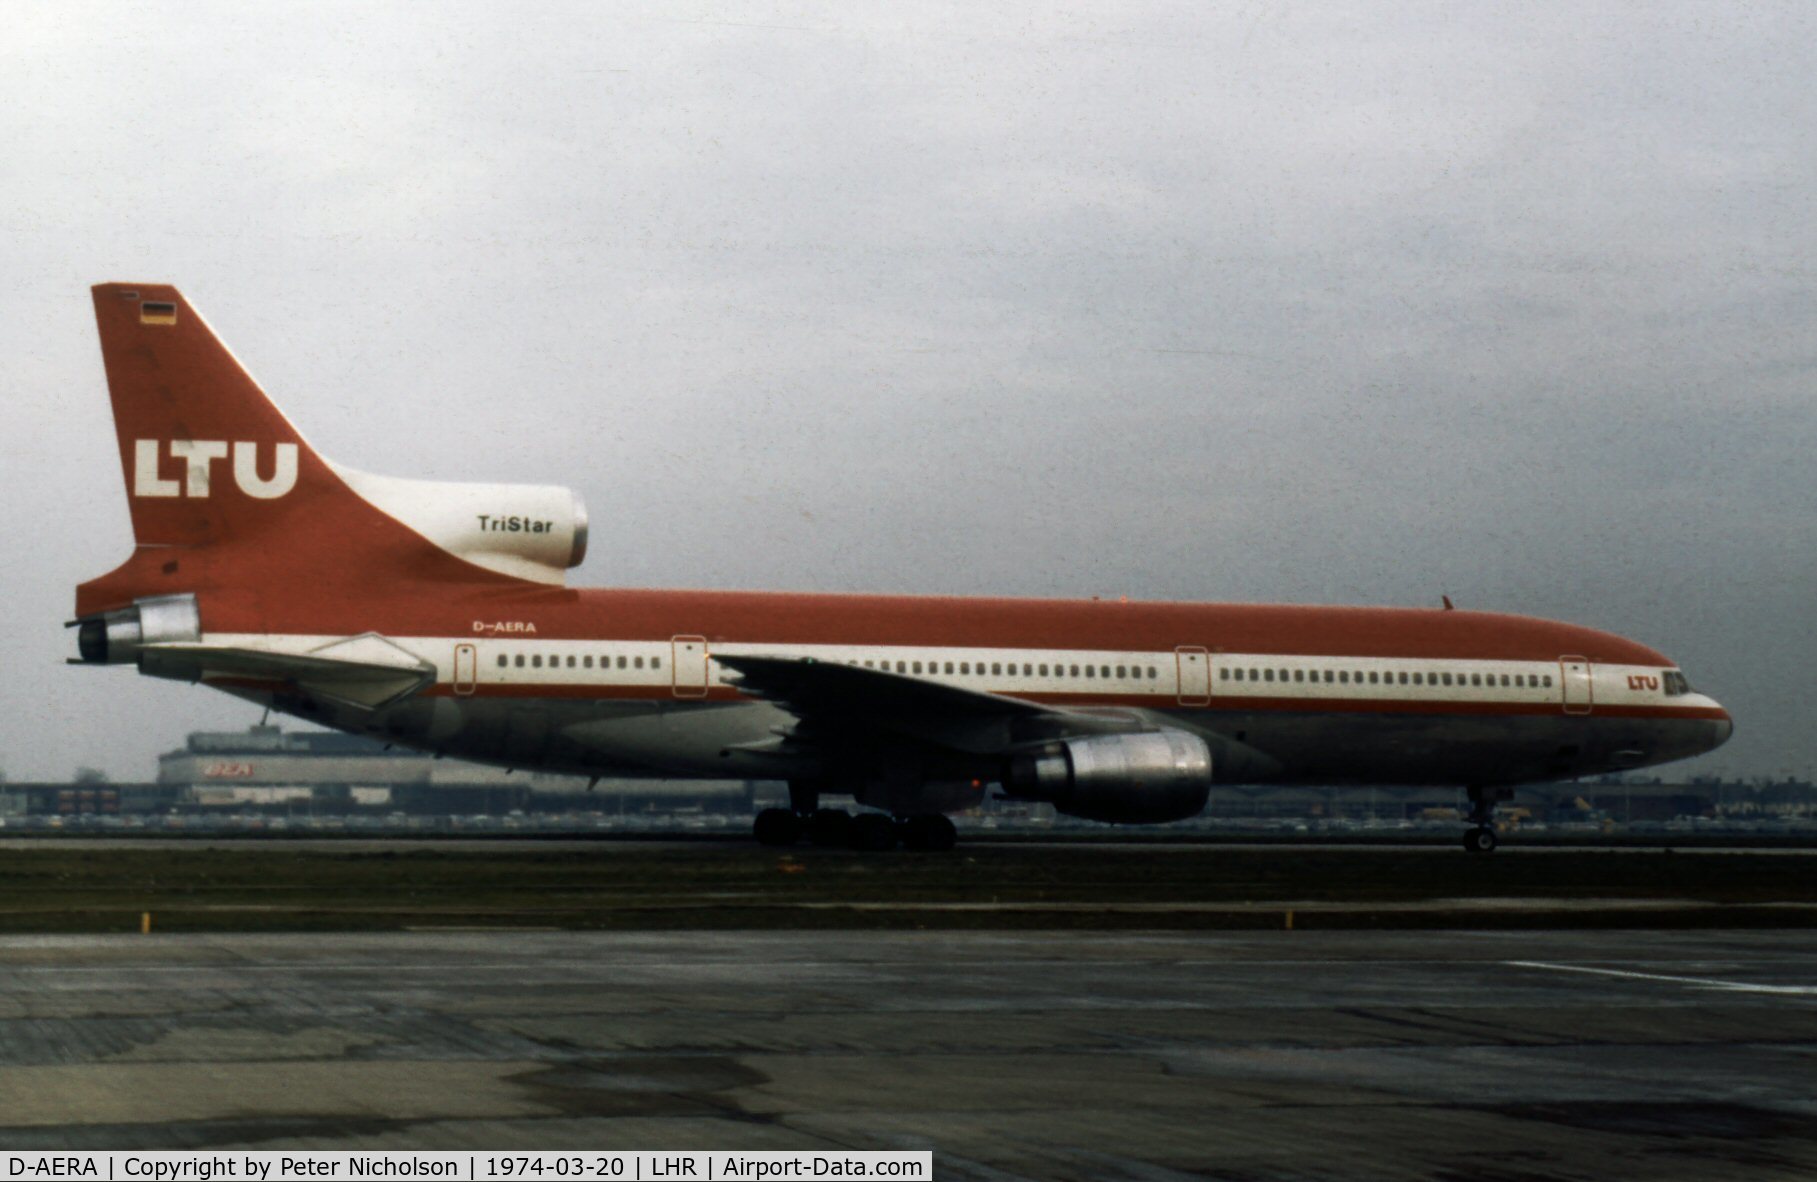 D-AERA, 1973 Lockheed L-1011-385-1 TriStar 1 C/N 193R-1033, TriStar 1 of LTU International Airways taxying to the active runway at London Heathrow in the Spring of 1974.